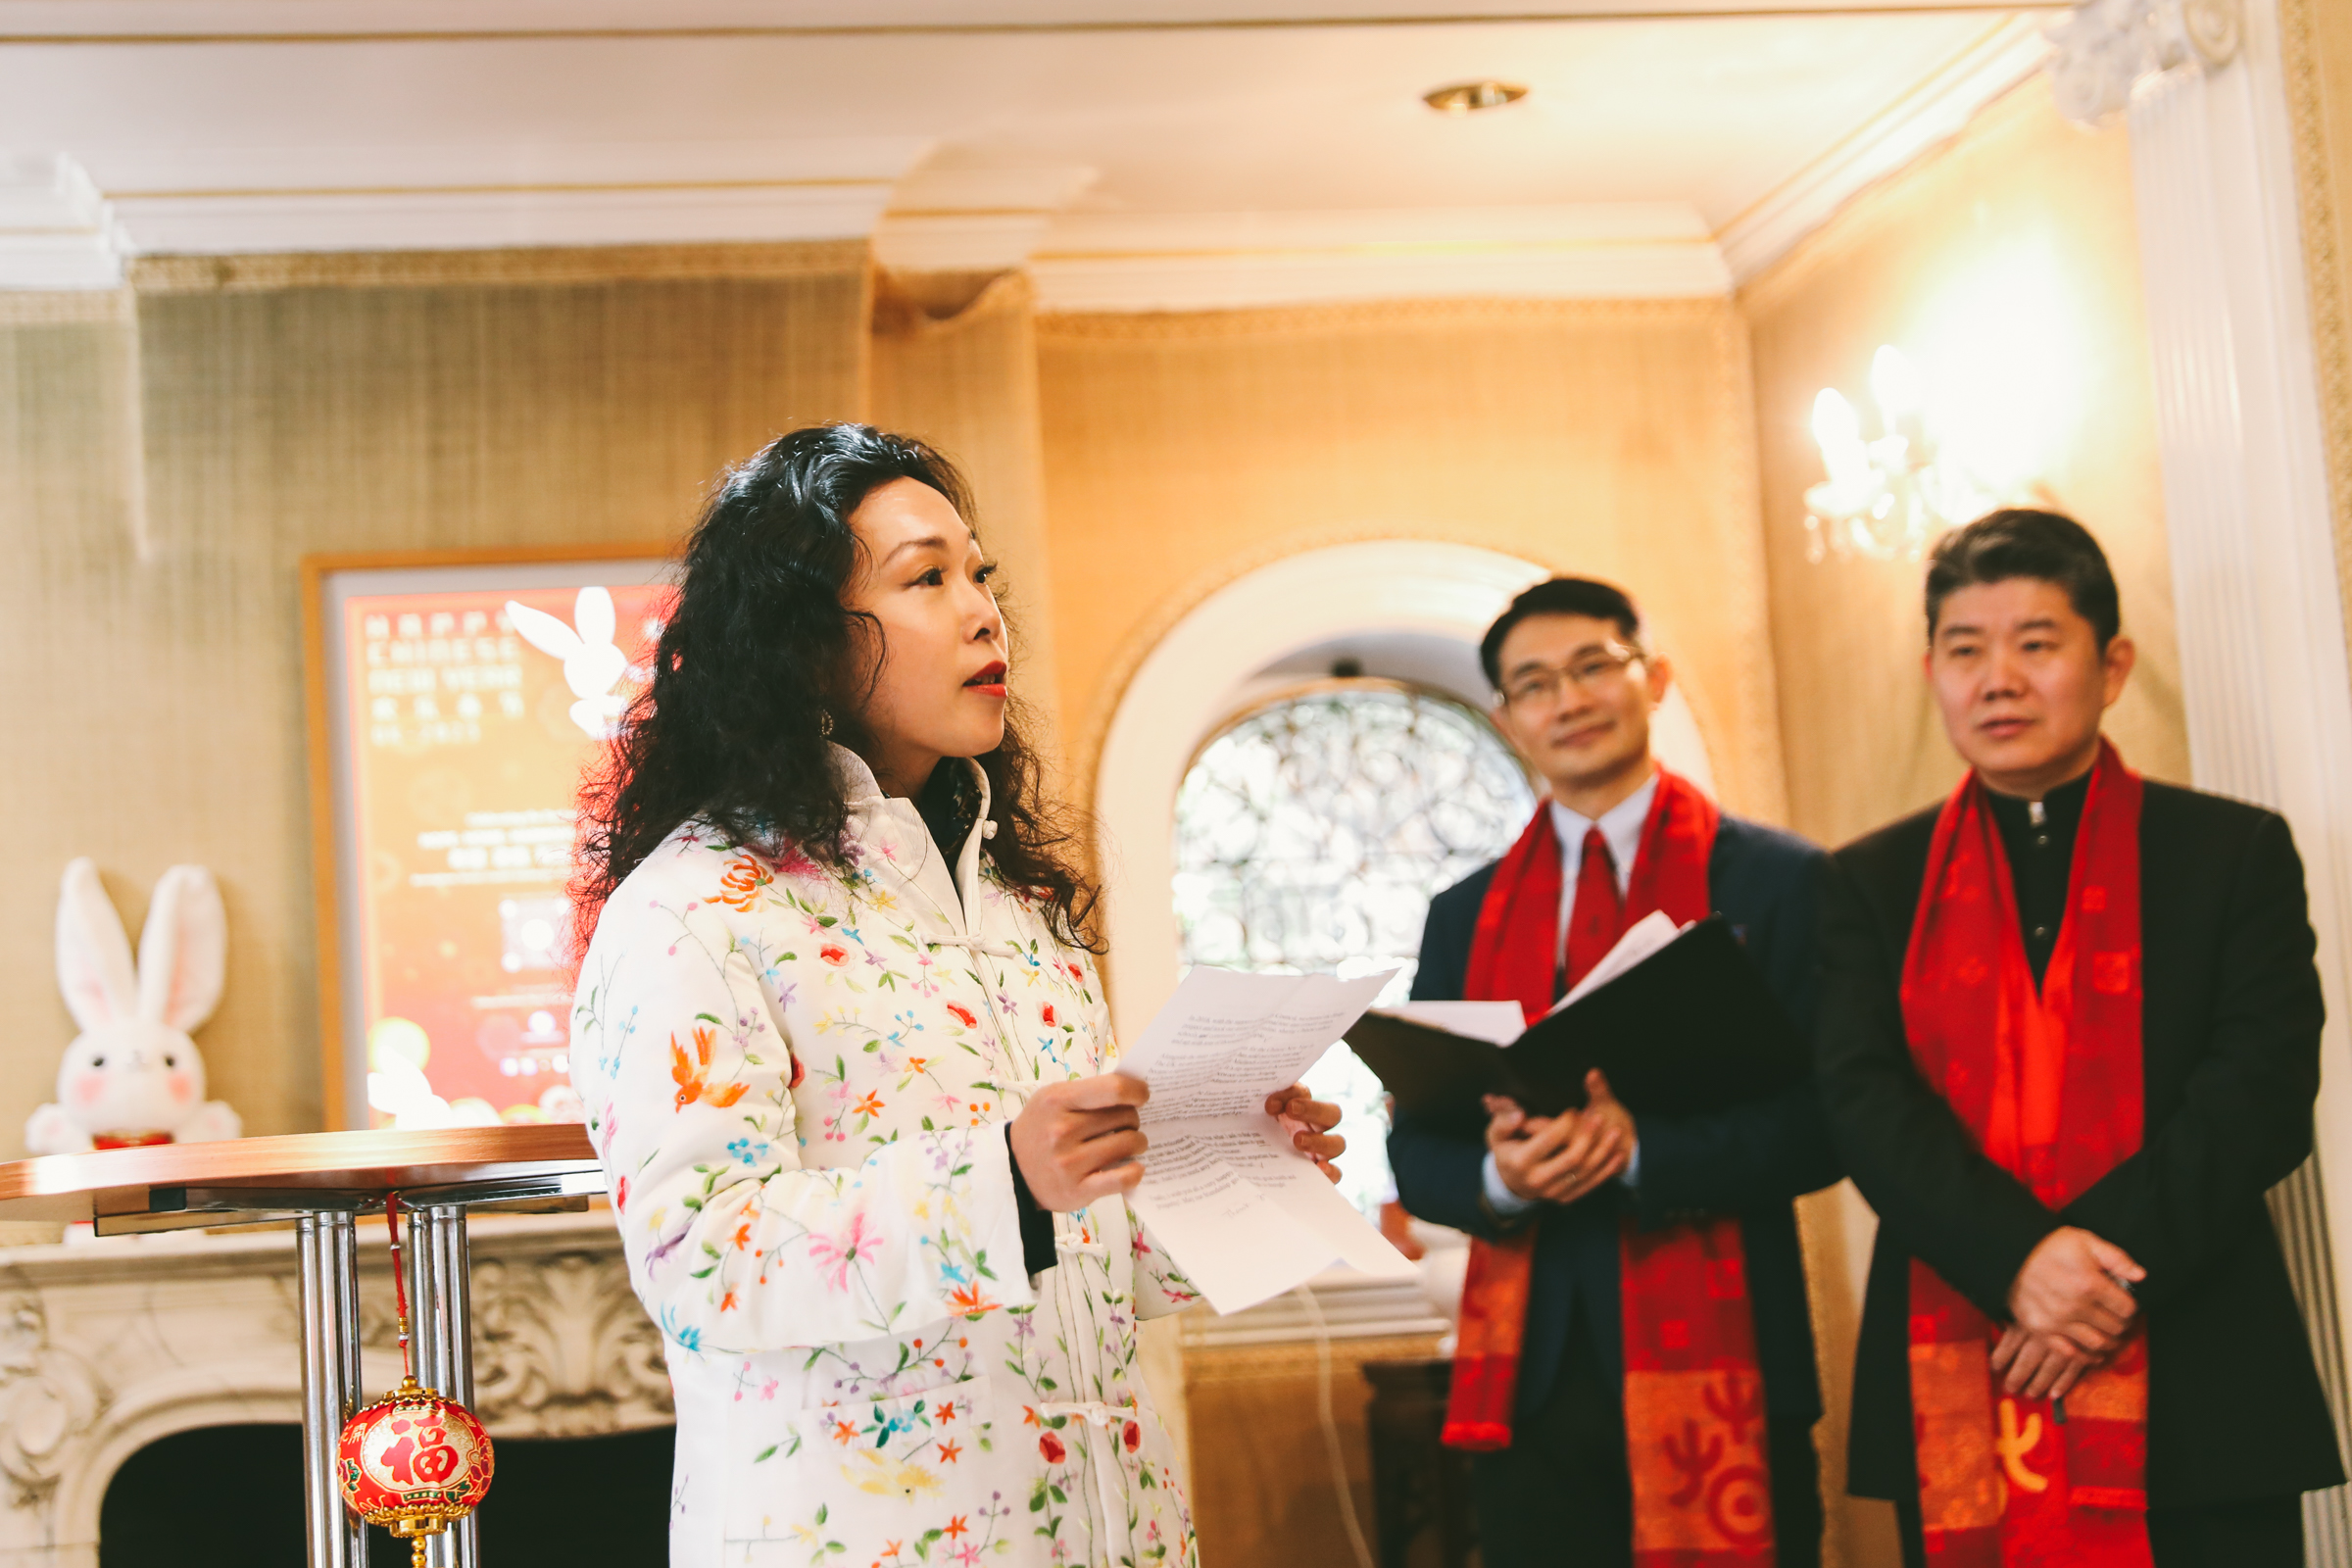 Pianist Xiao Di introduces Chinese New Year concert for the Year of the Rabbit. /Cultural Section of the Chinese Embassy in London